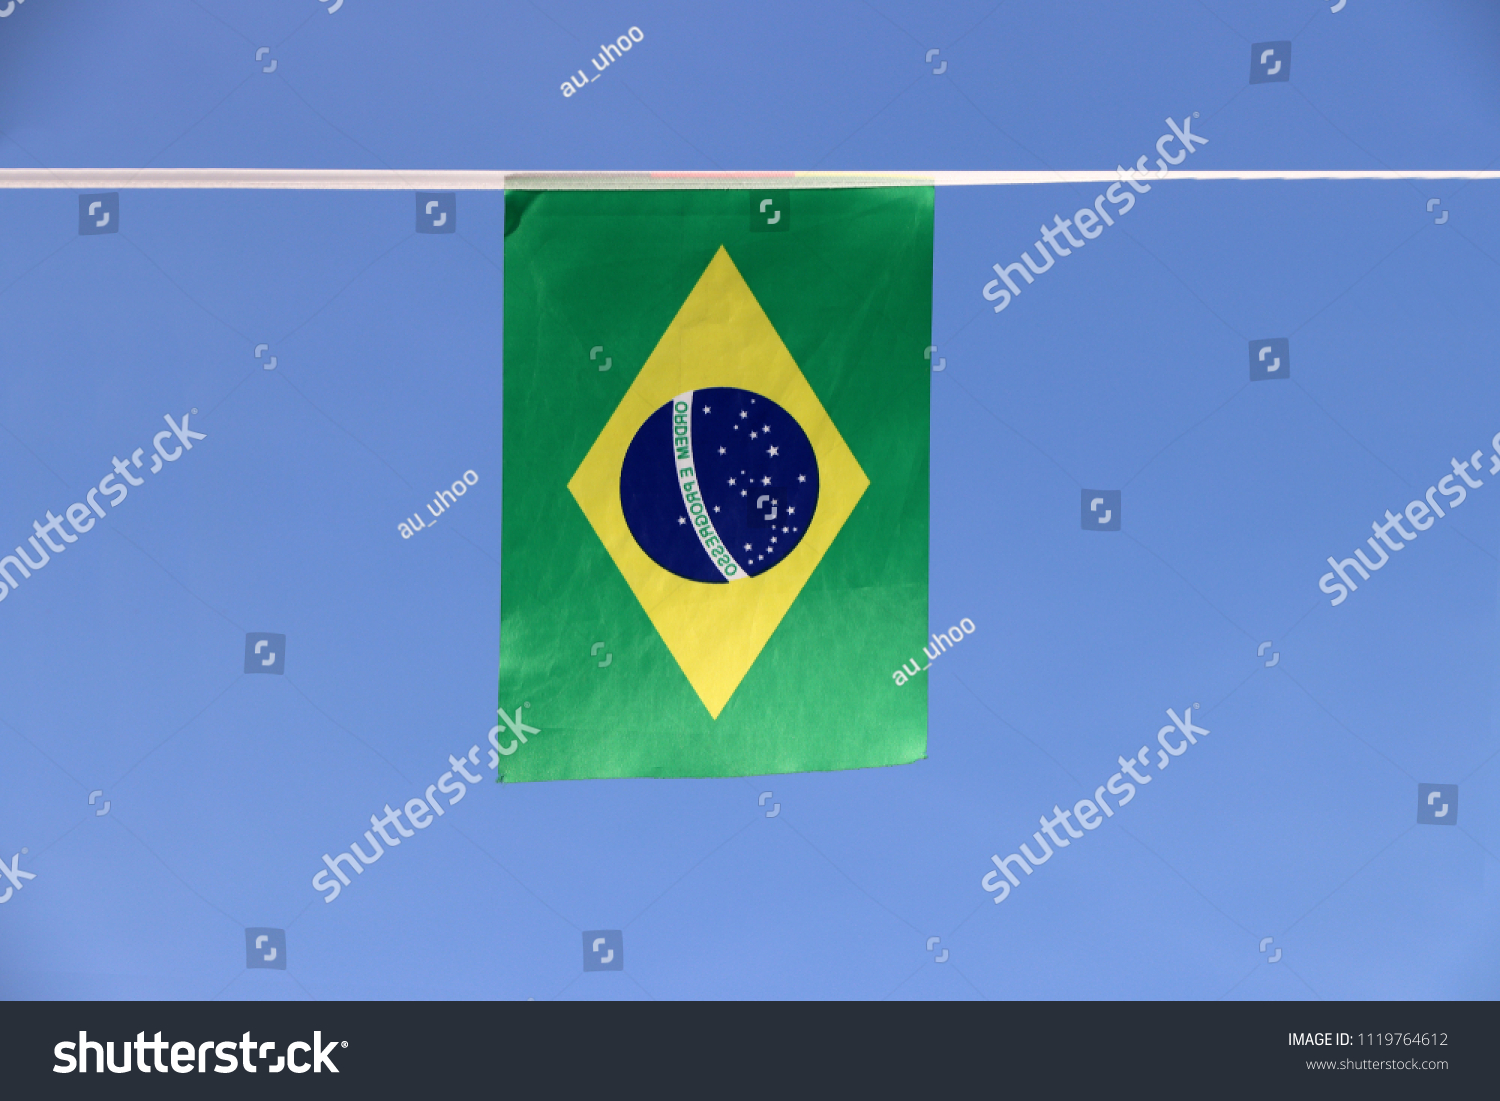 Mini fabric rail flag of Brazil, a blue disc depicting a starry sky with the national motto Order and Progress, within a yellow rhombus, on a green field. It hanging on the rope cloth on blue sky. #1119764612